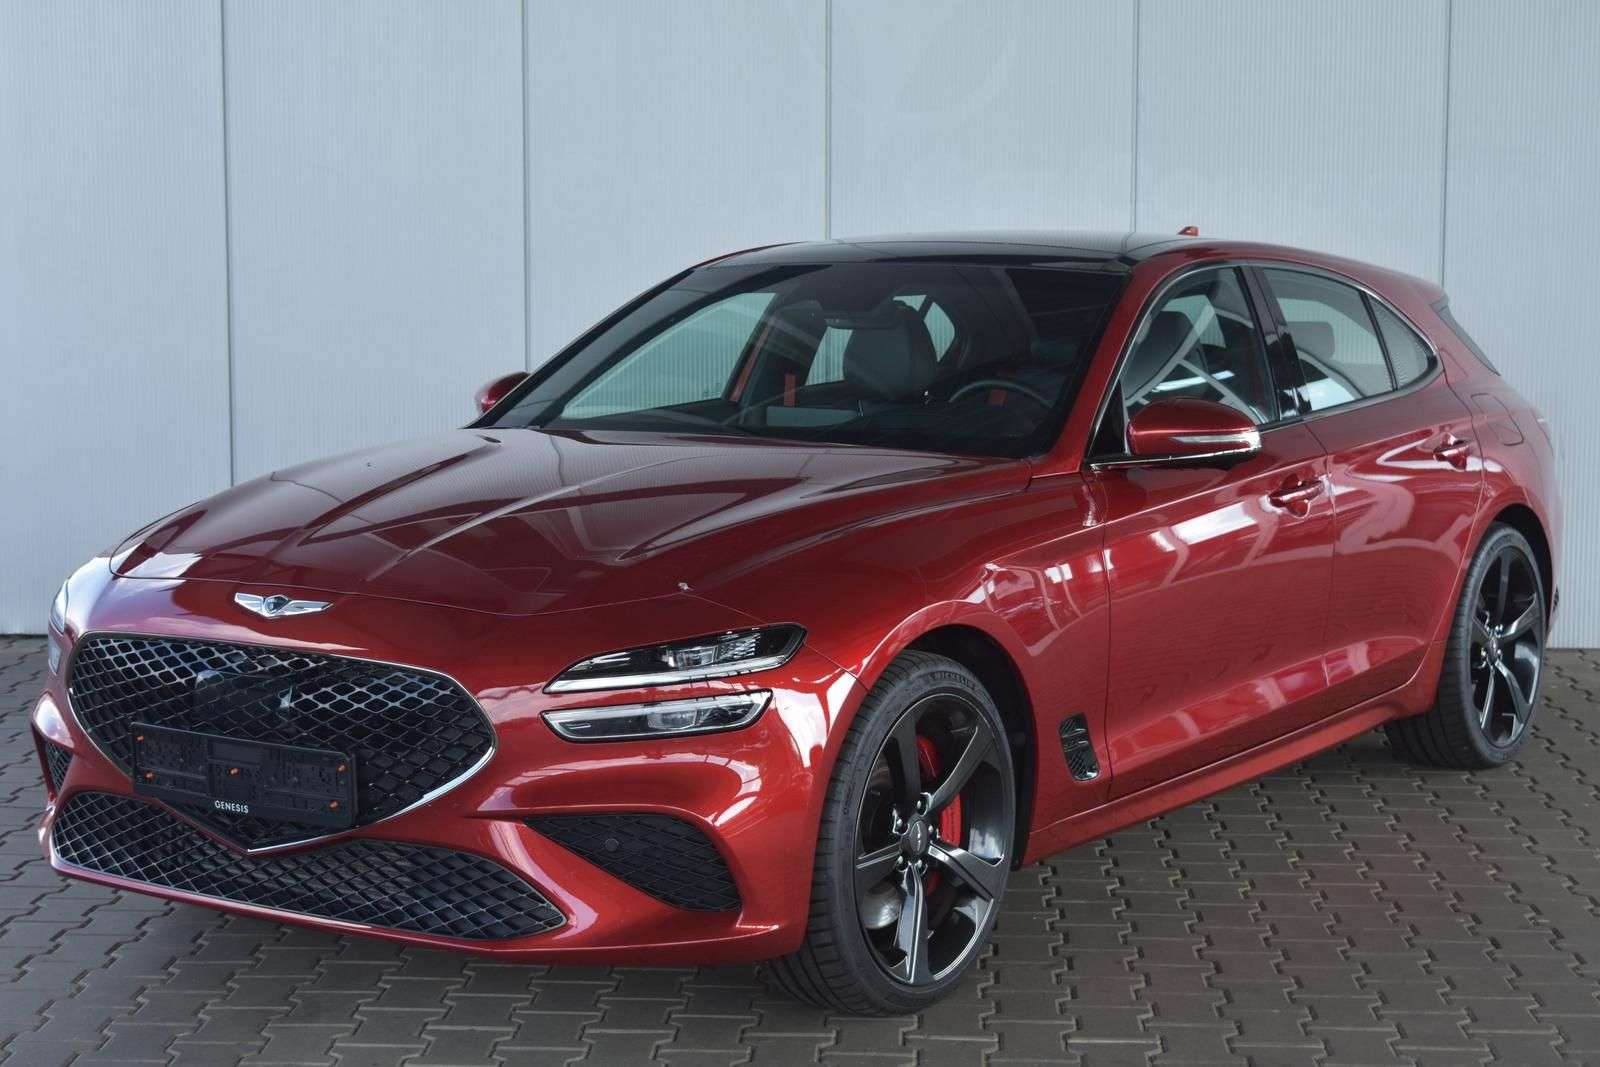 Genesis G70 Station wagon in Red used in Bochum for € 53,950.-